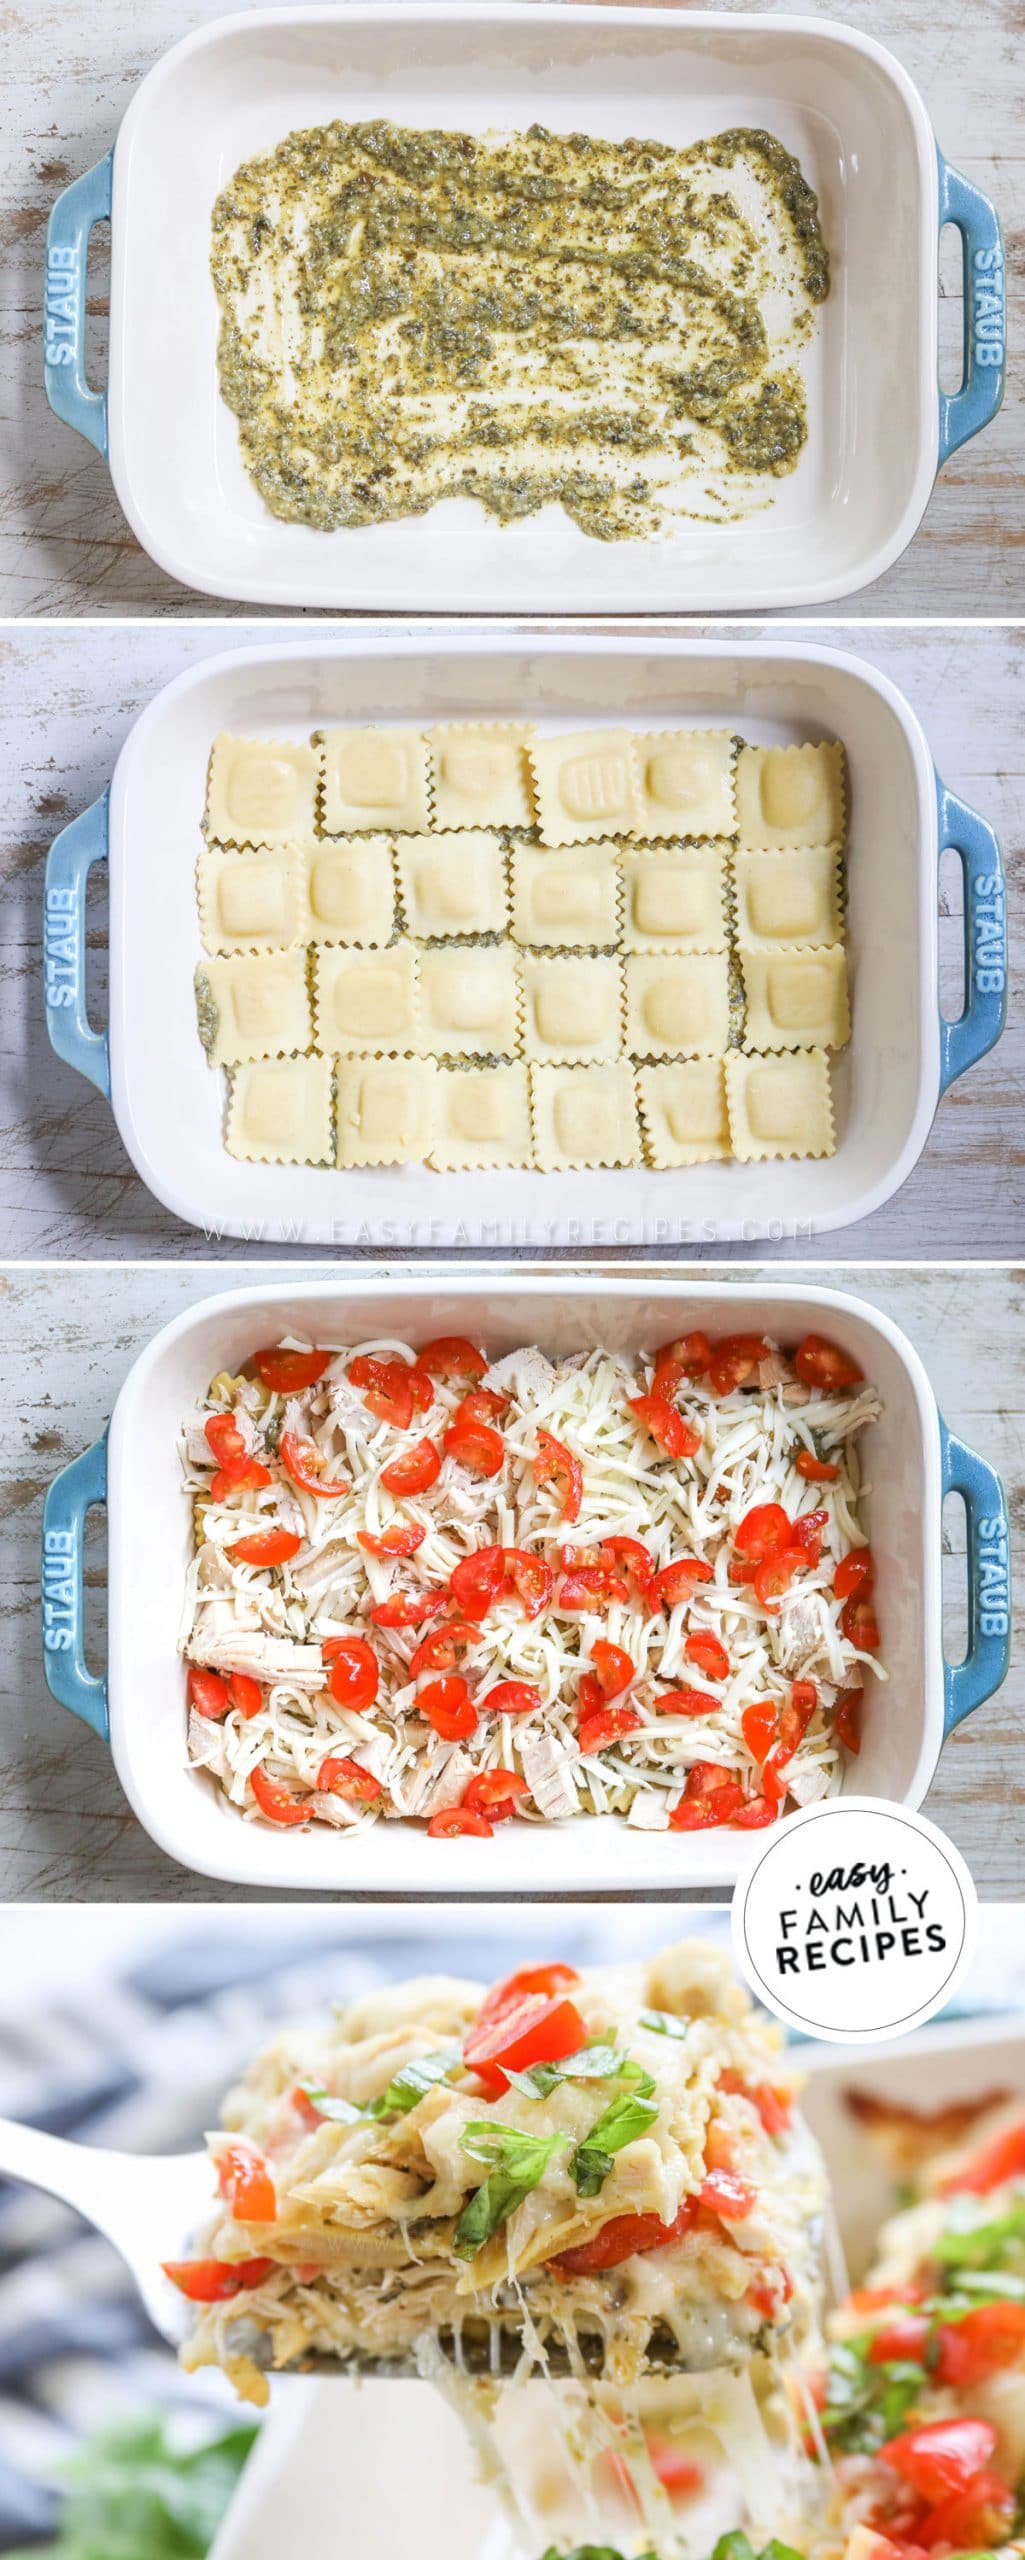 How to make Chicken Ravioli Bake - 1. Spread pesto on the bottom of a baking dish. 2. Layer refrigerated ravioli in the dish. 3. Cover with chicken, pesto, cheese, and tomatoes. repeat. 4. Bake until the casserole is hot throughout